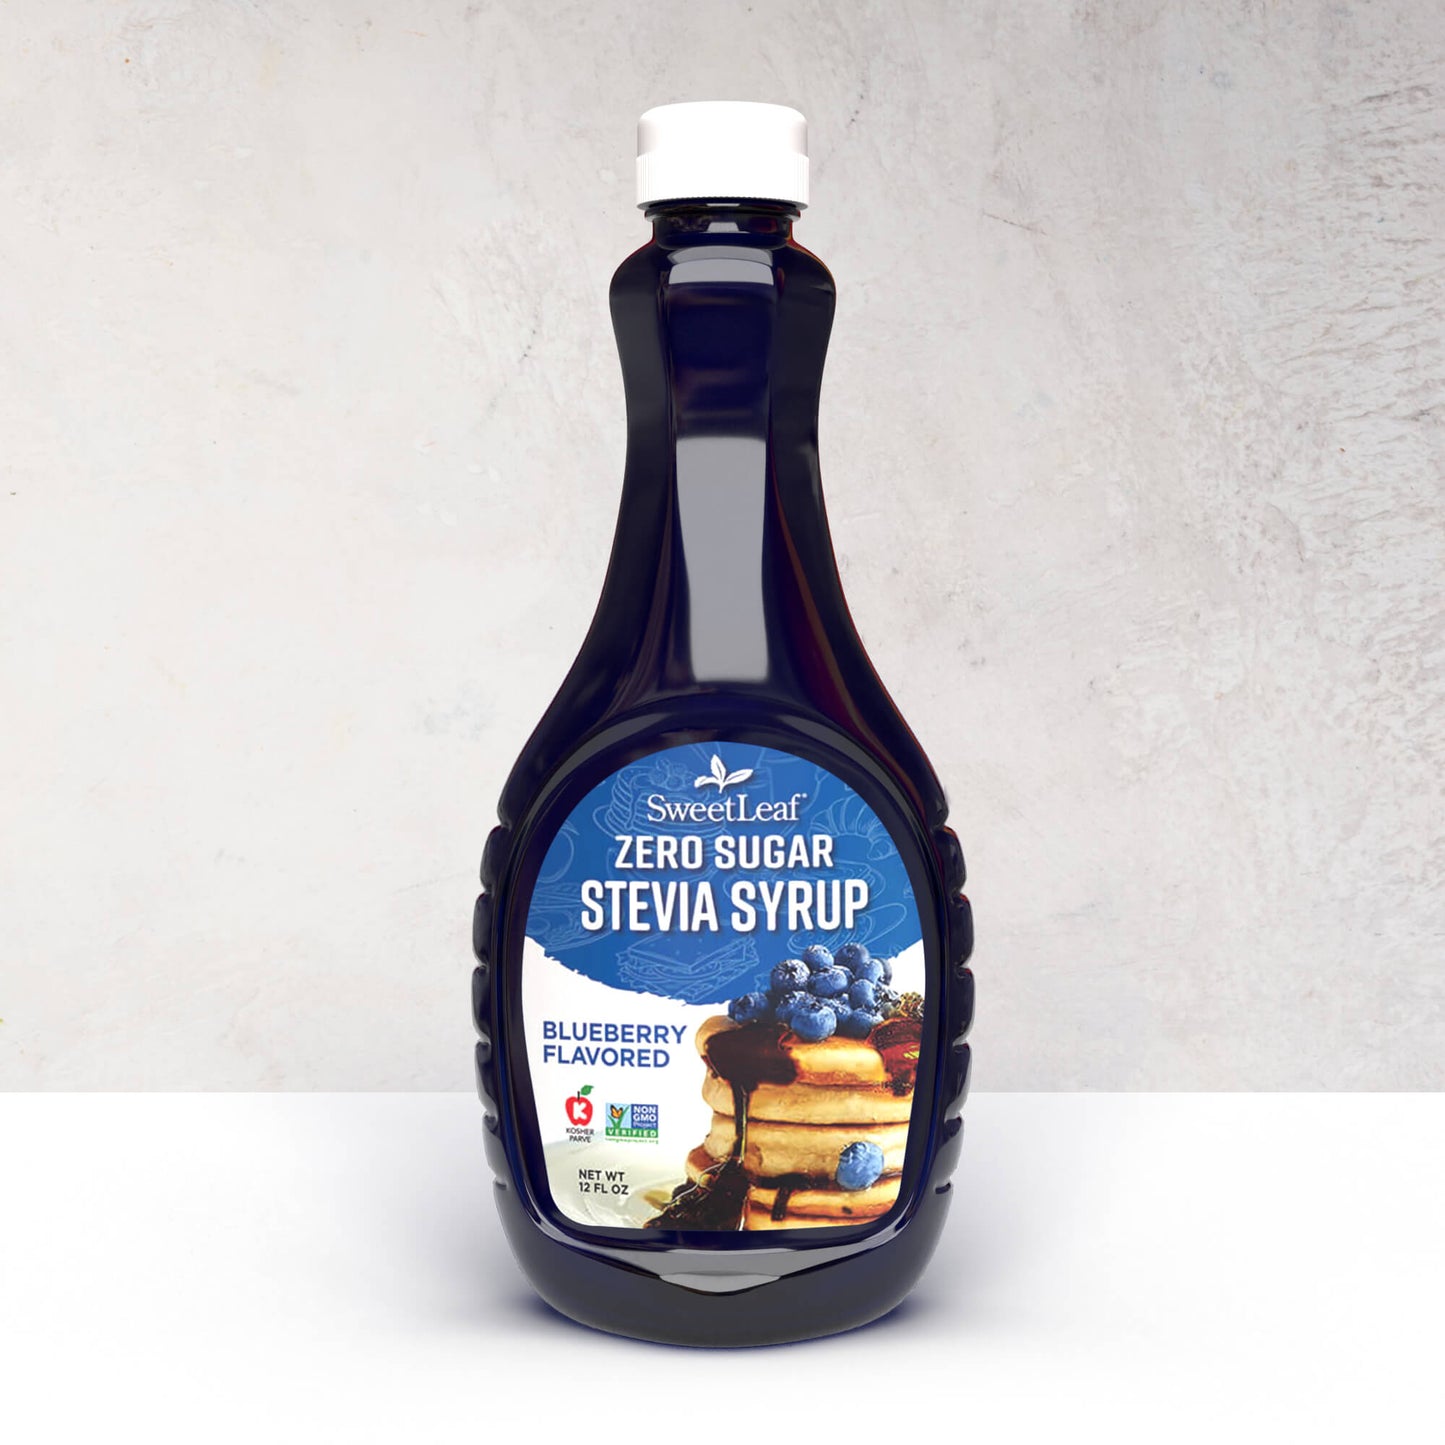 Sugar-Free Stevia Syrup, Blueberry, 12 servings